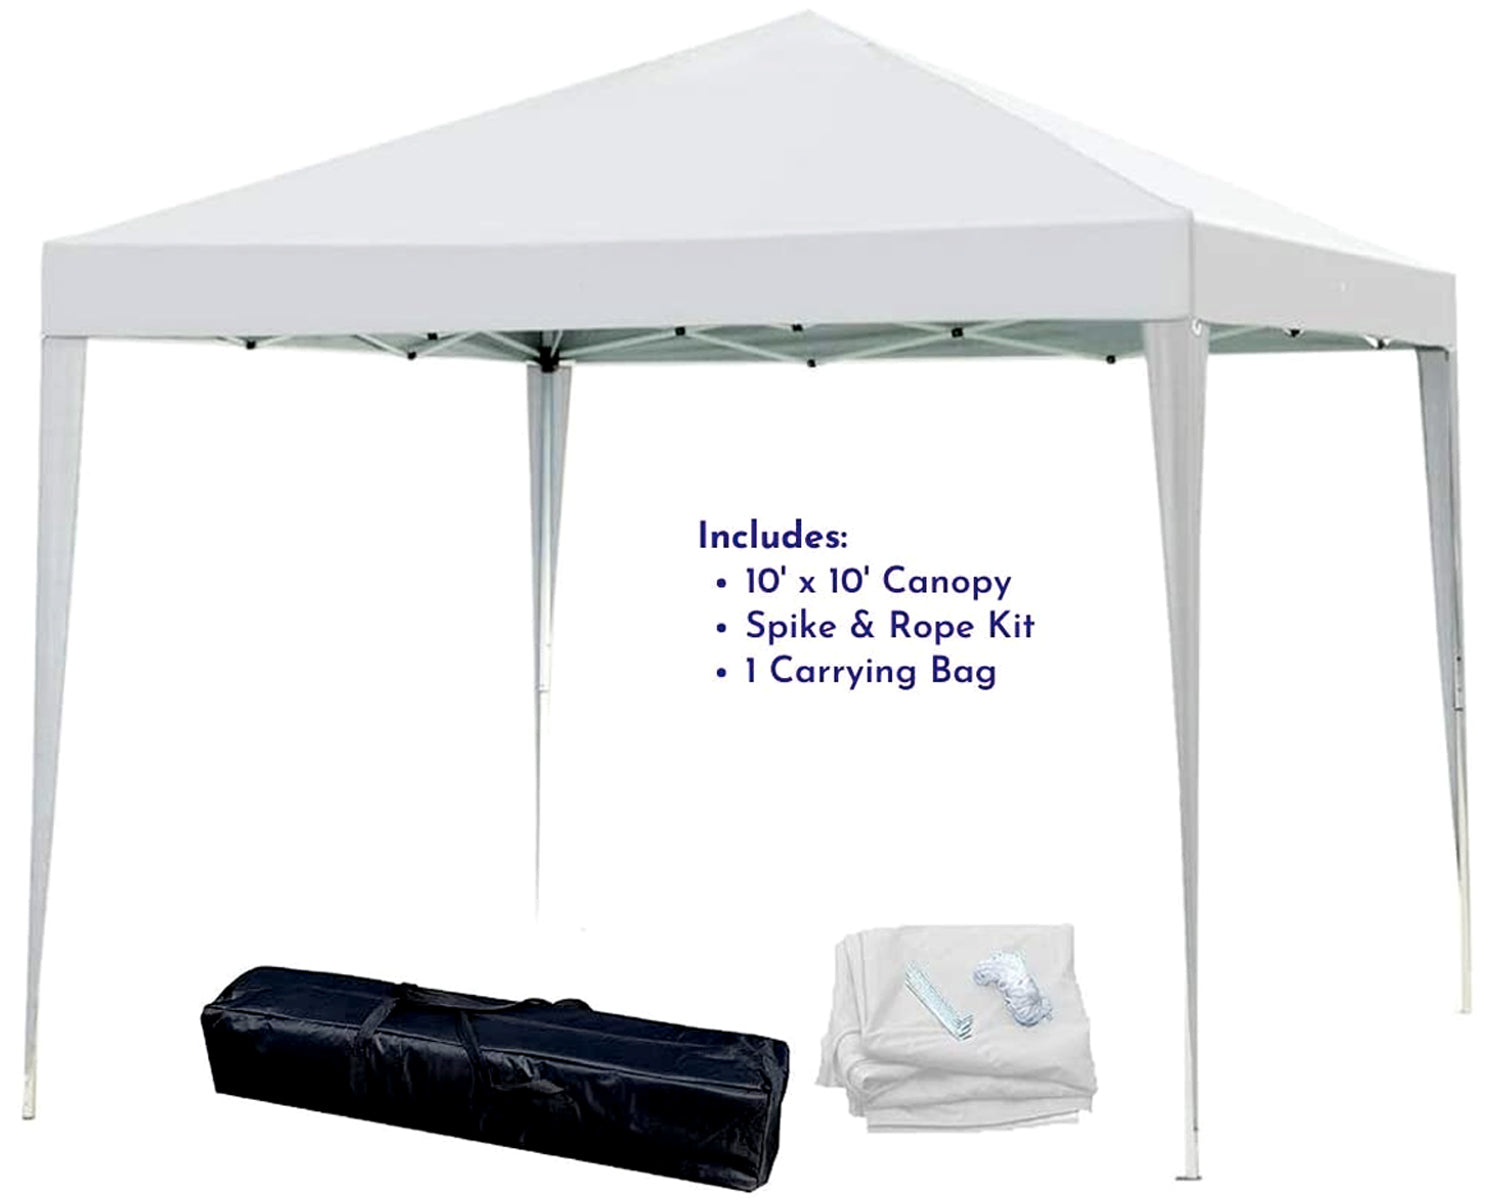 Canopy Tent Outdoor Heavy Duty Pop Up Canopy With 4 Slide Walls, Waterproof Wedding Party Tent for Catering Event Patio Garden Pool 10'*10', 10'*20', 10'*30' White